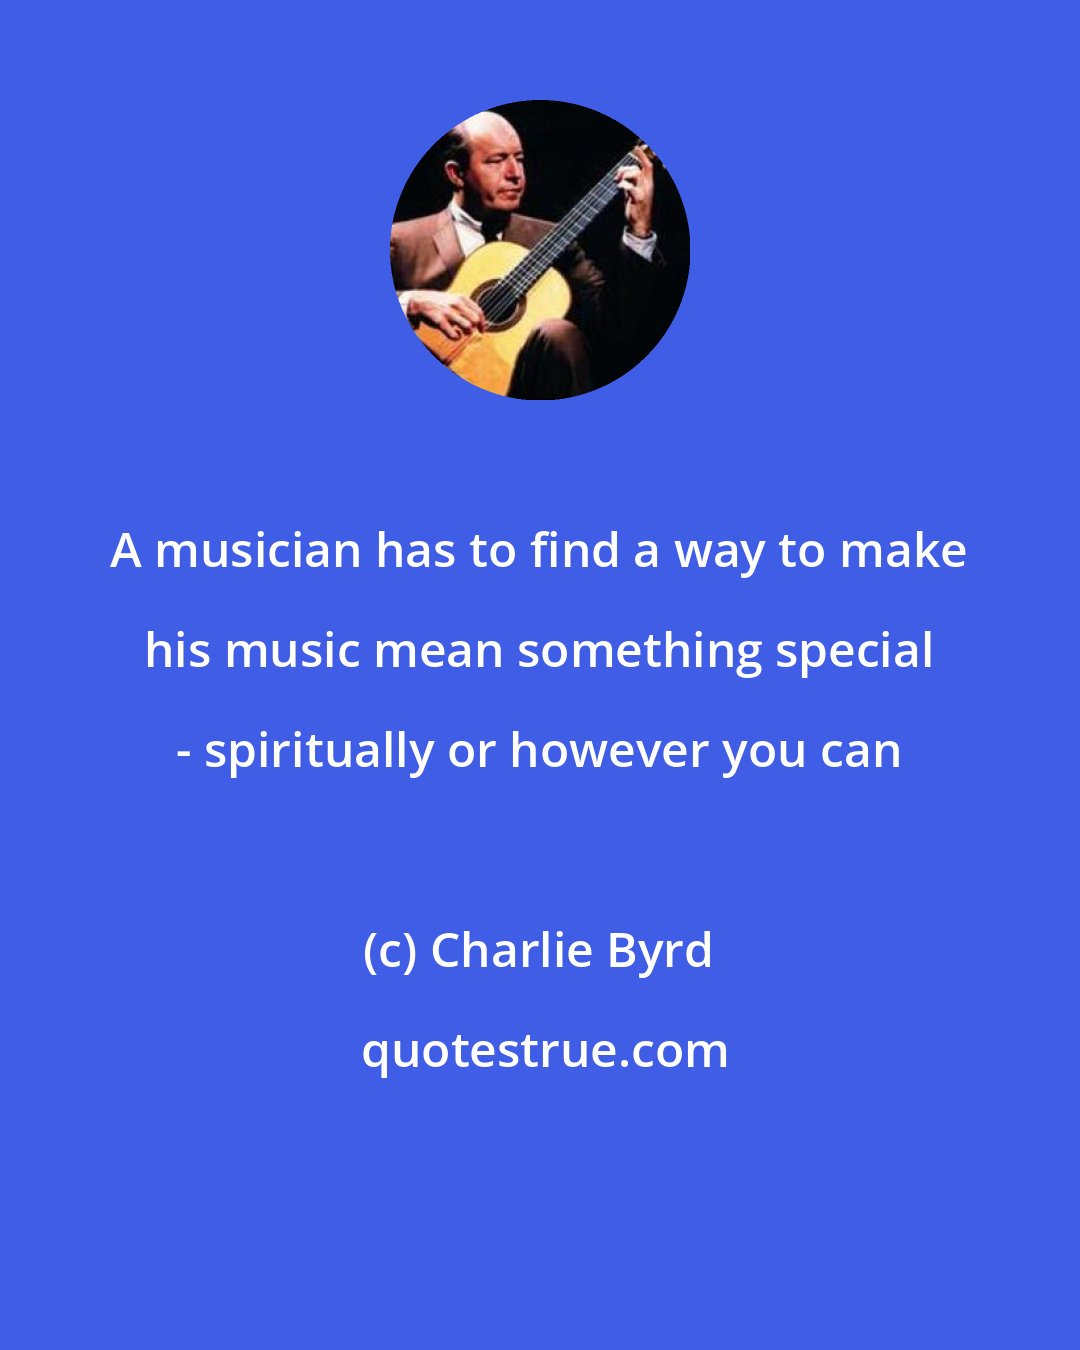 Charlie Byrd: A musician has to find a way to make his music mean something special - spiritually or however you can